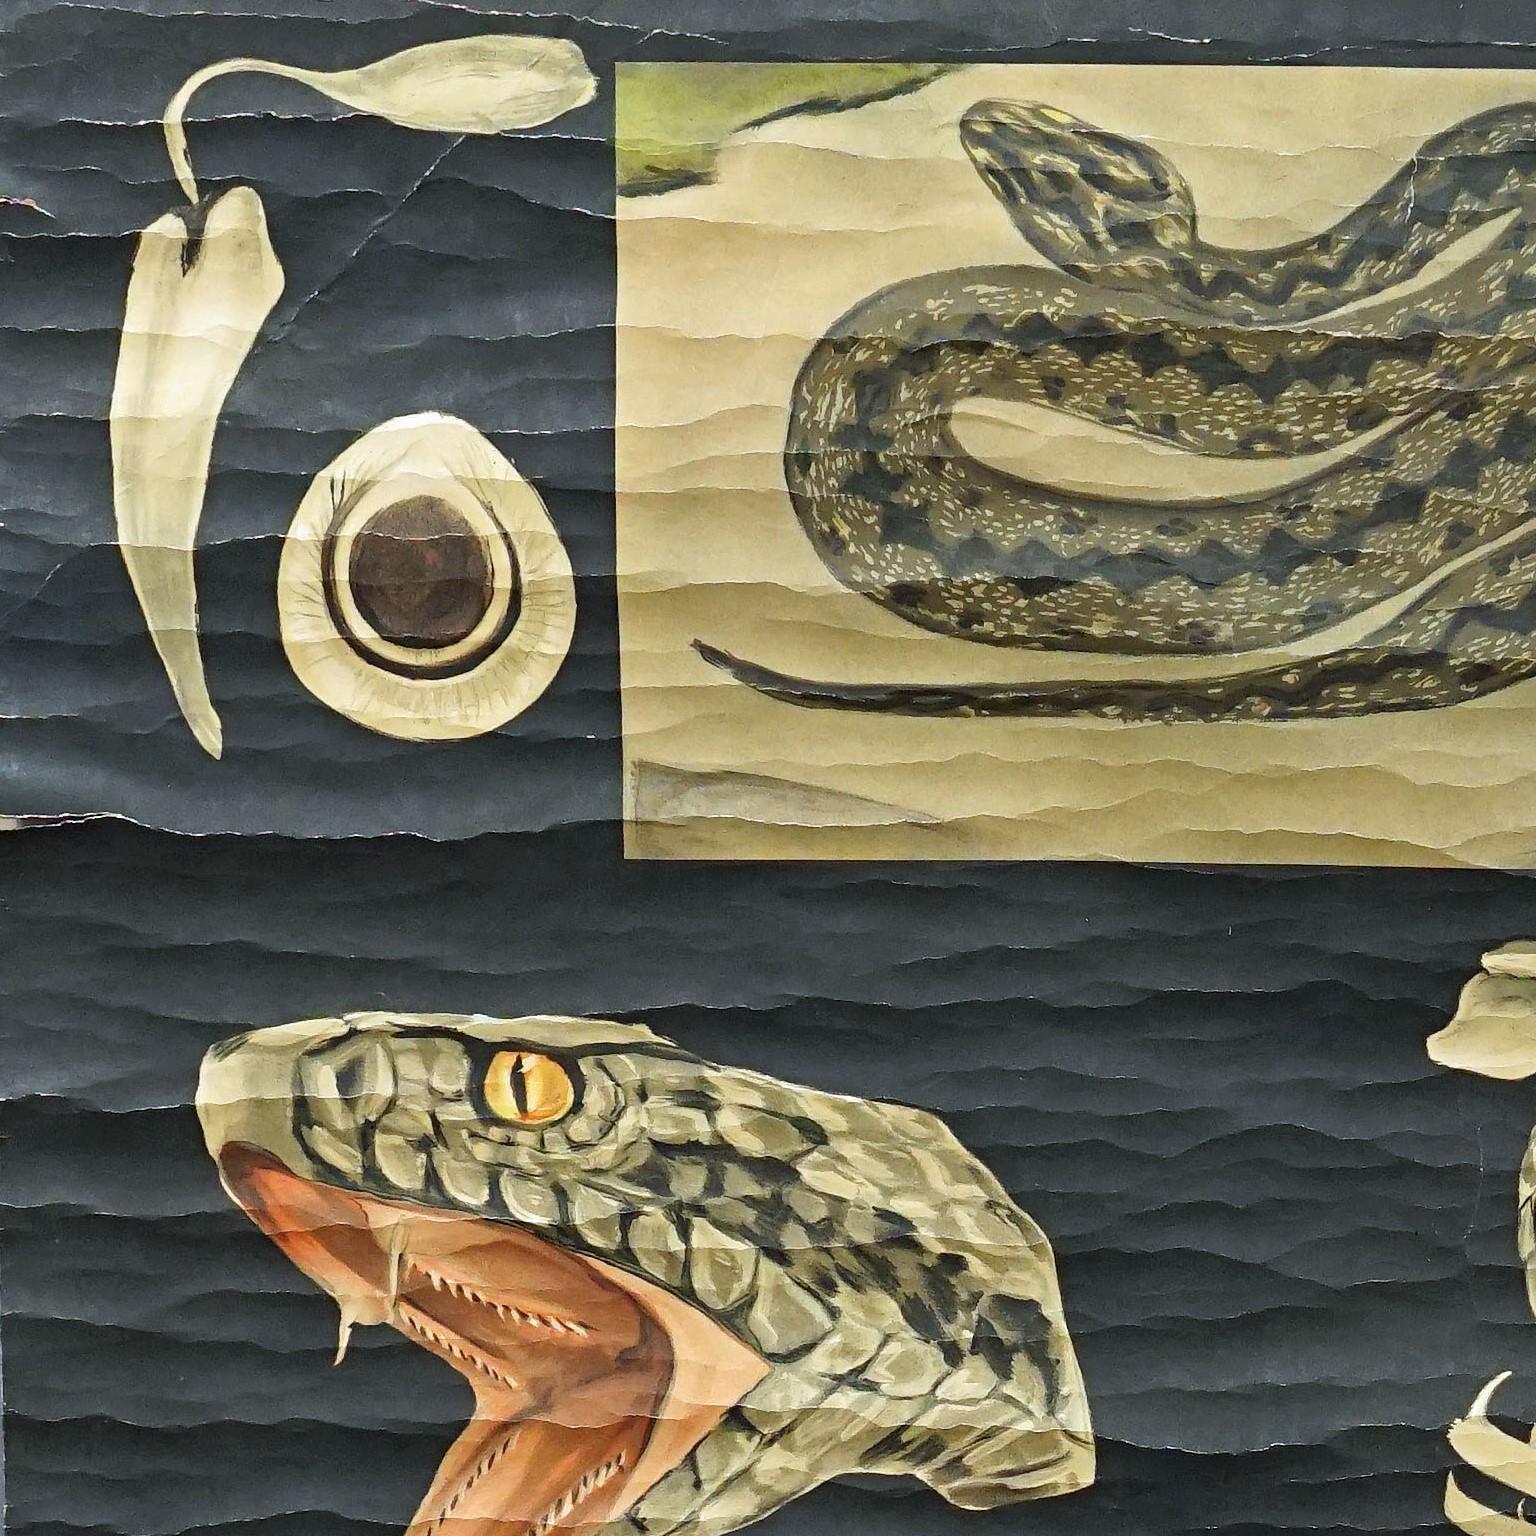 Jung Koch Quentell Old Print Mural Rollable Wall Chart Poster Snake Serpent

The old pull-down wallchart by the popular art team of Jung Koch Quentell illustrates a snake, and its anatomy and reproduction. Published by Fromann & Morian, Darmstadt